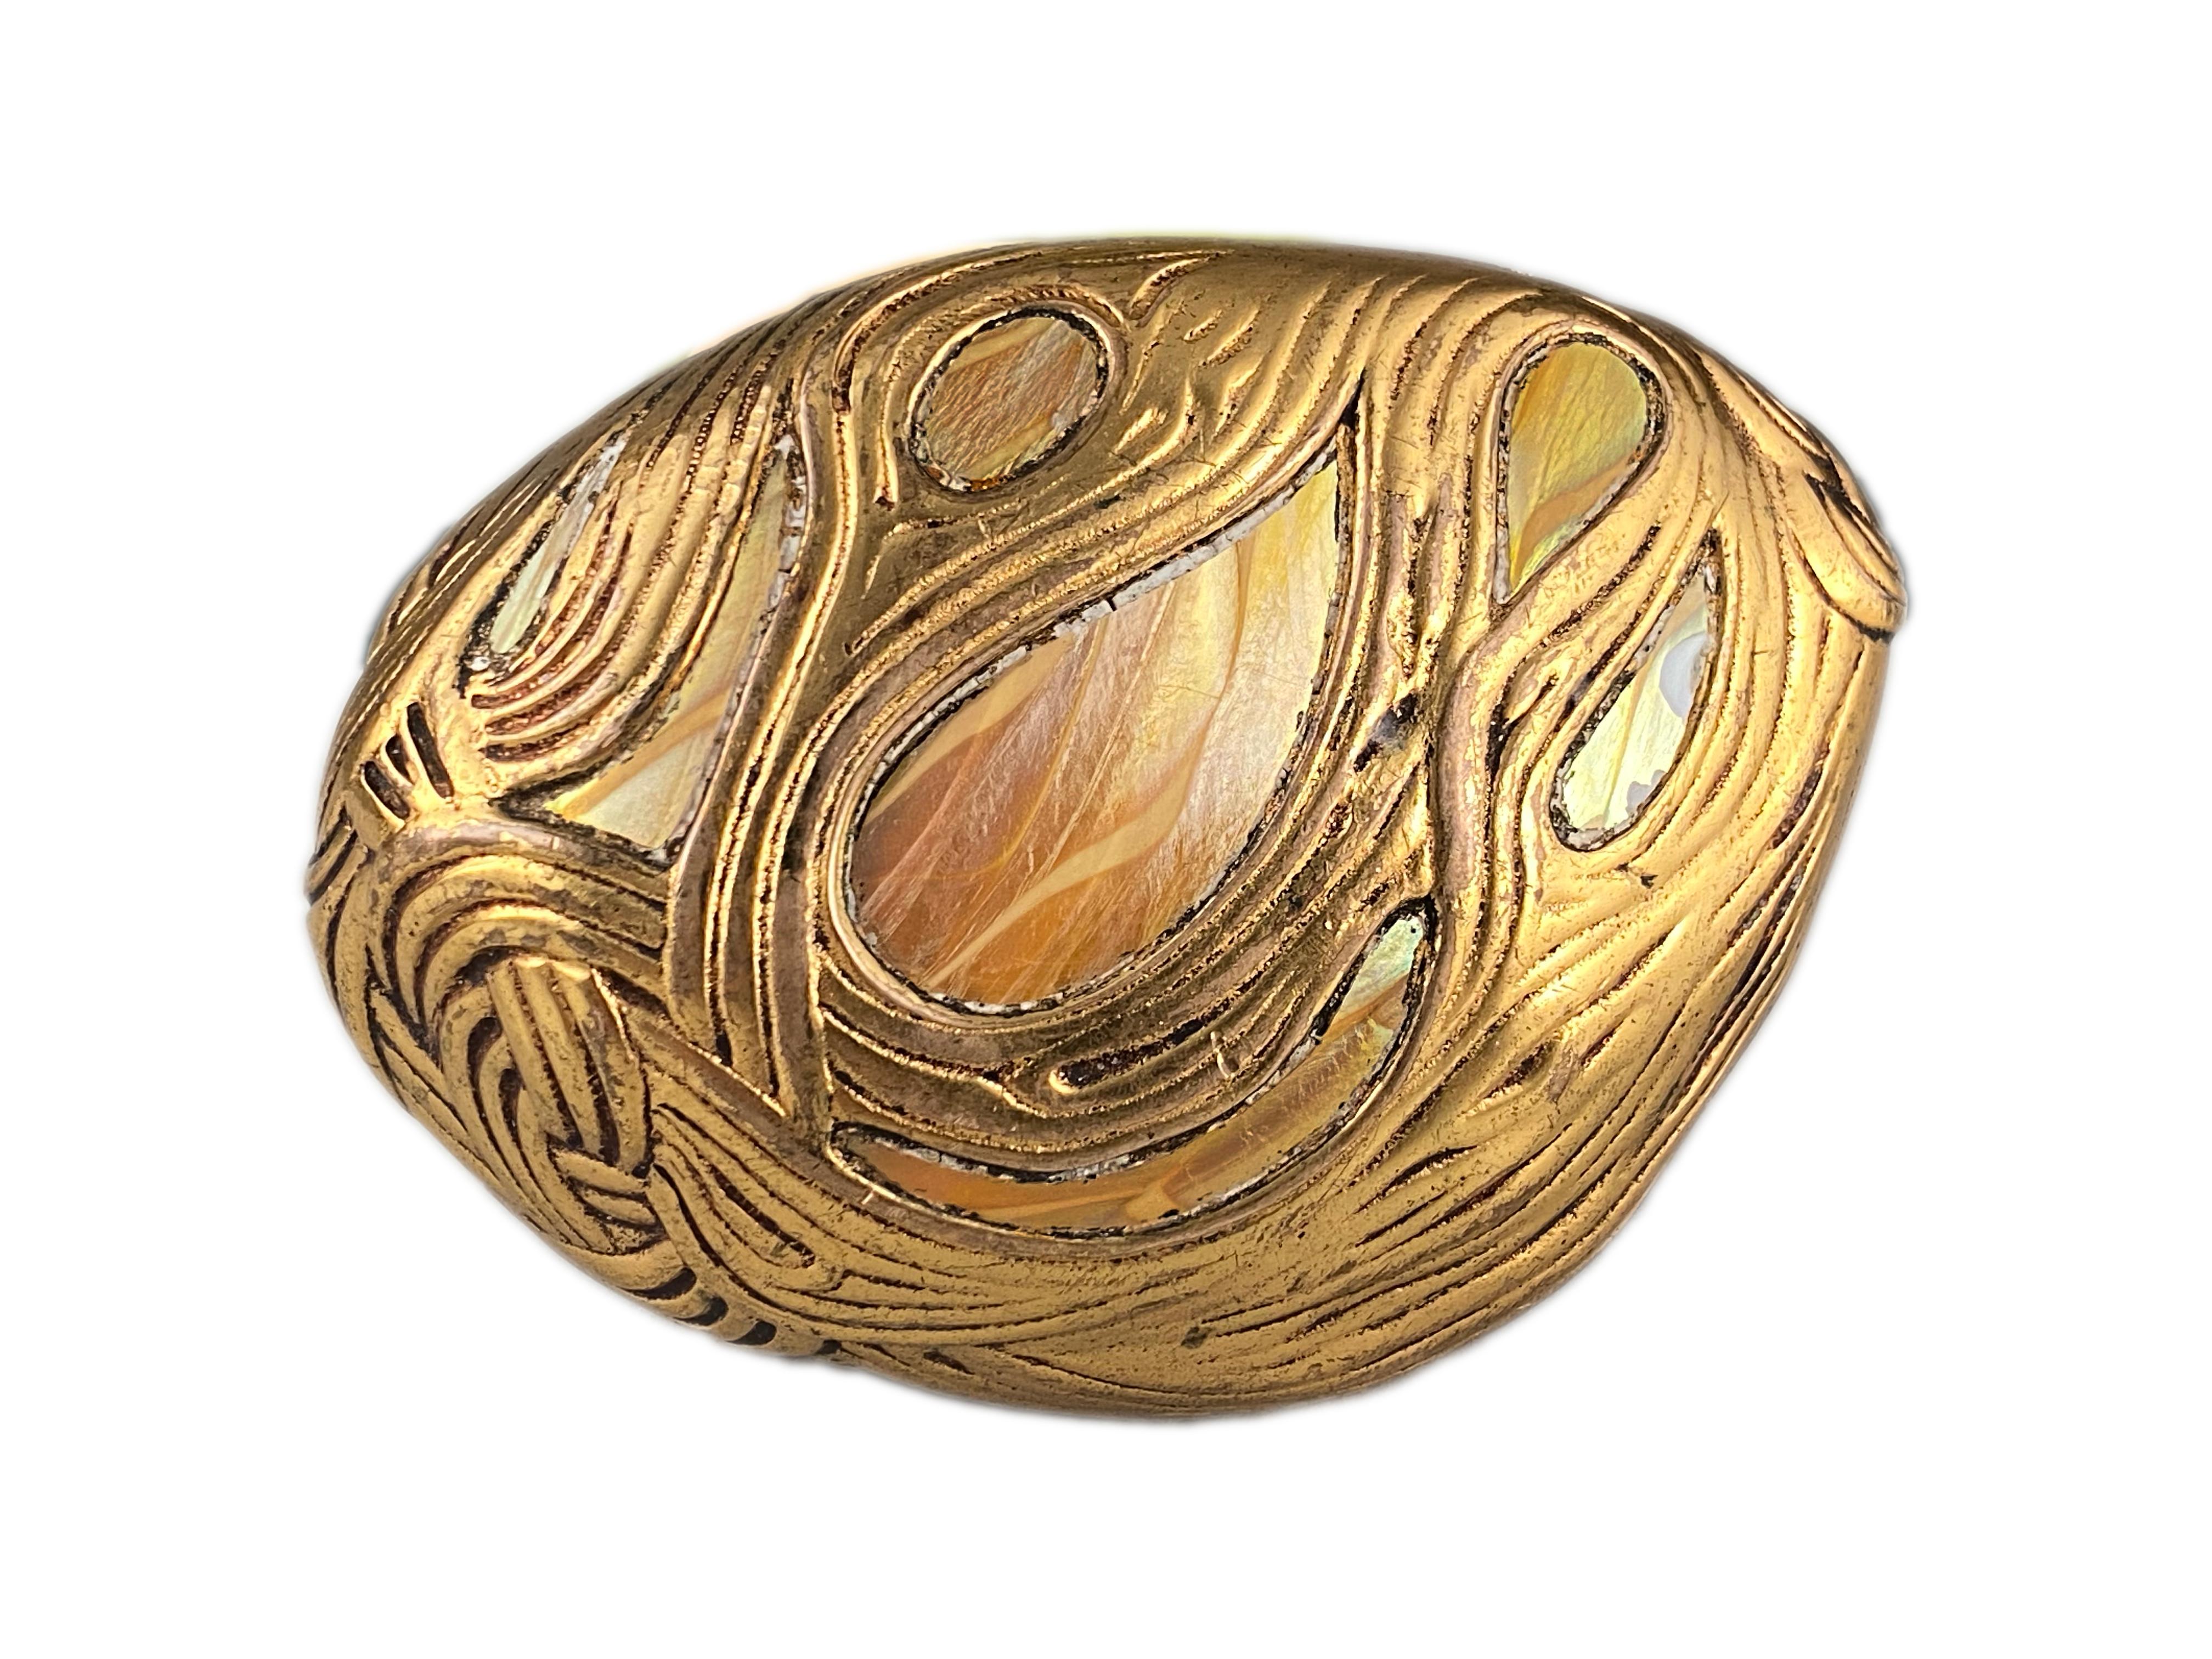 American Art Nouveau Swirl Paperweight by, Tiffany Studios In Good Condition For Sale In Englewood, NJ